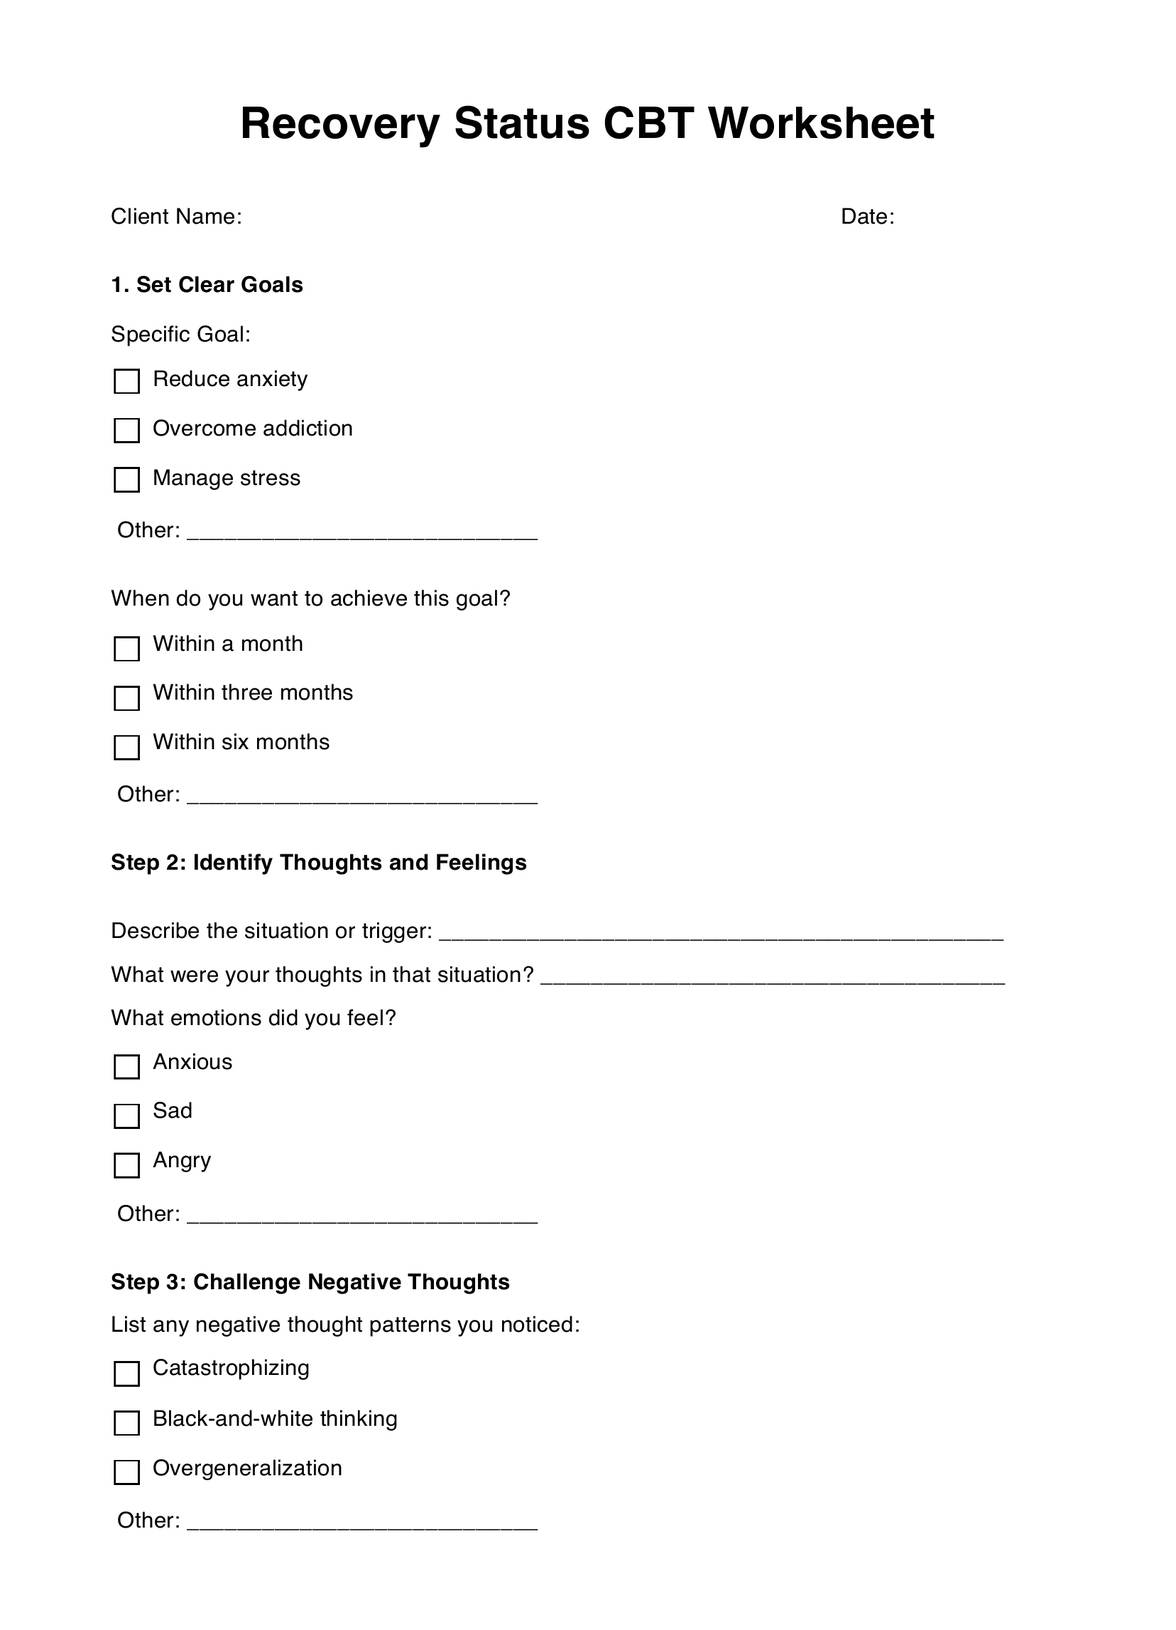 Recovery Status CBT Worksheet PDF Example